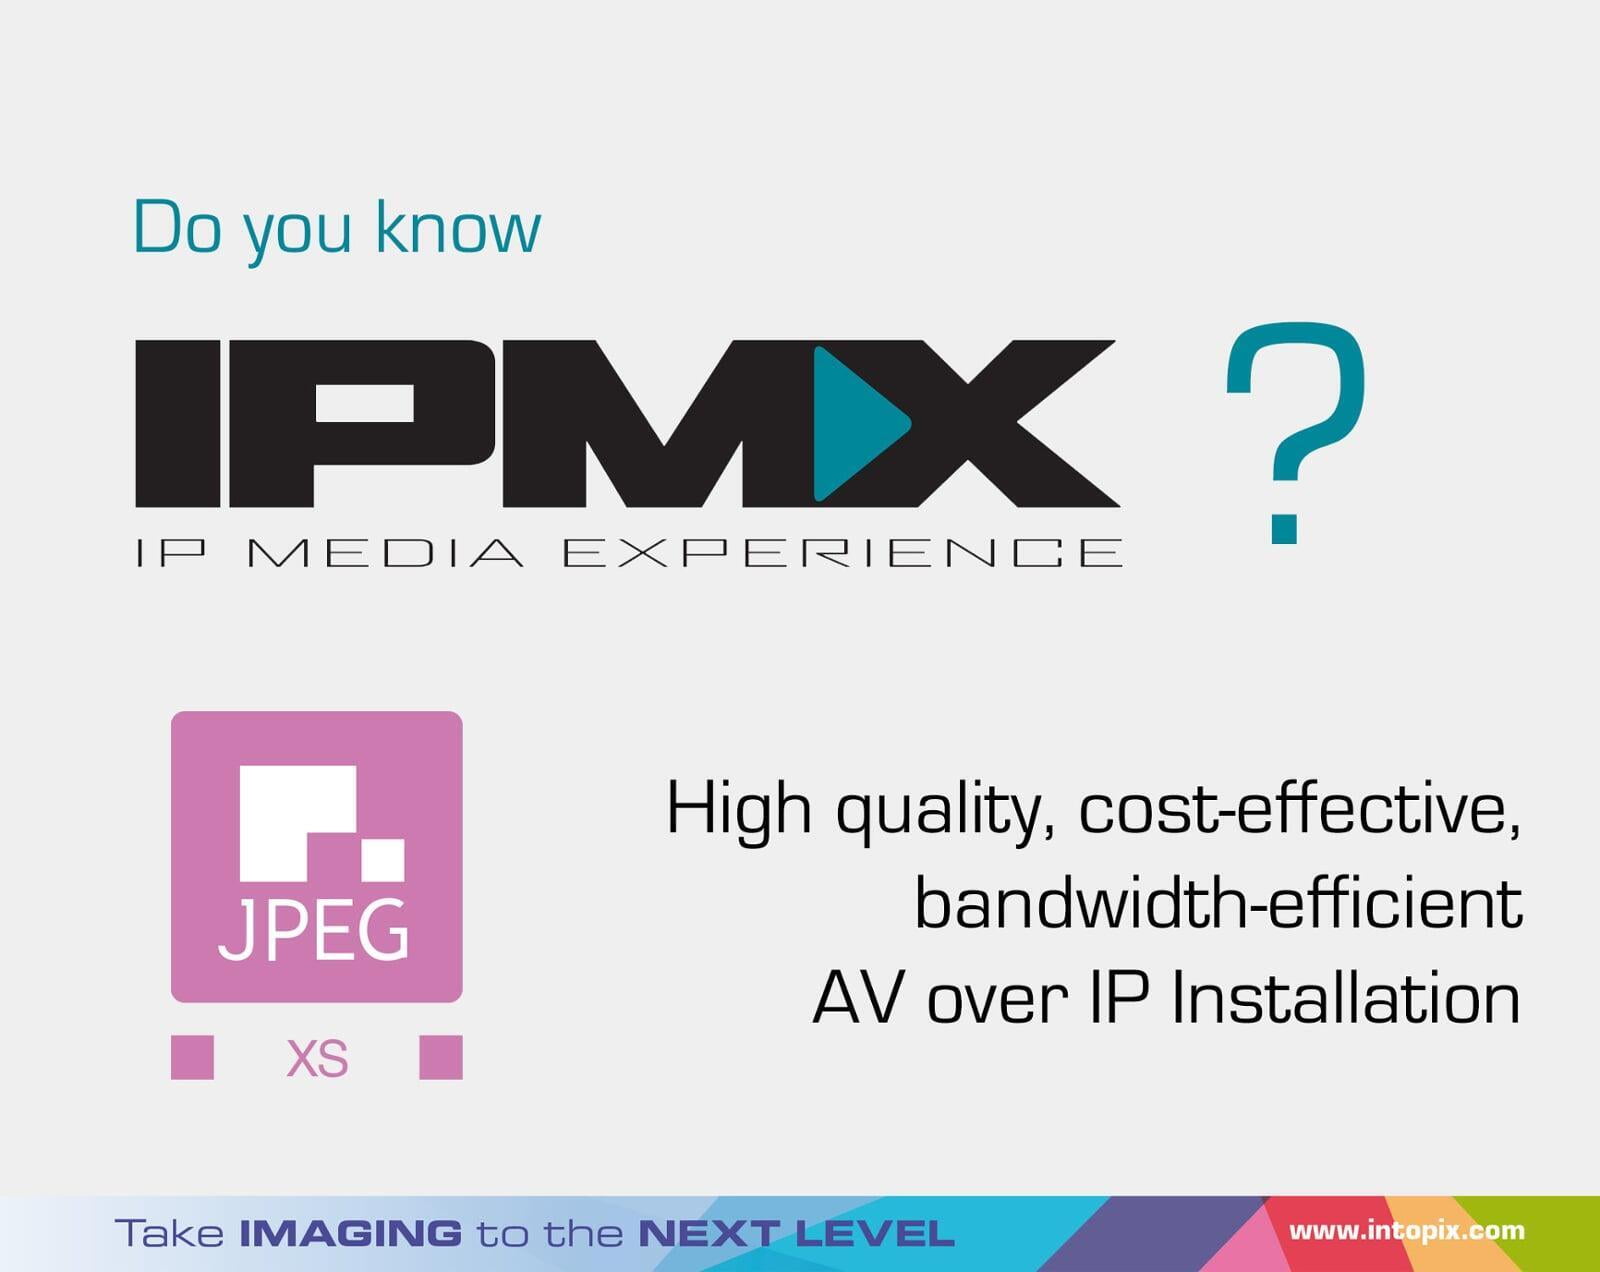 Do you know what IPMX means ?